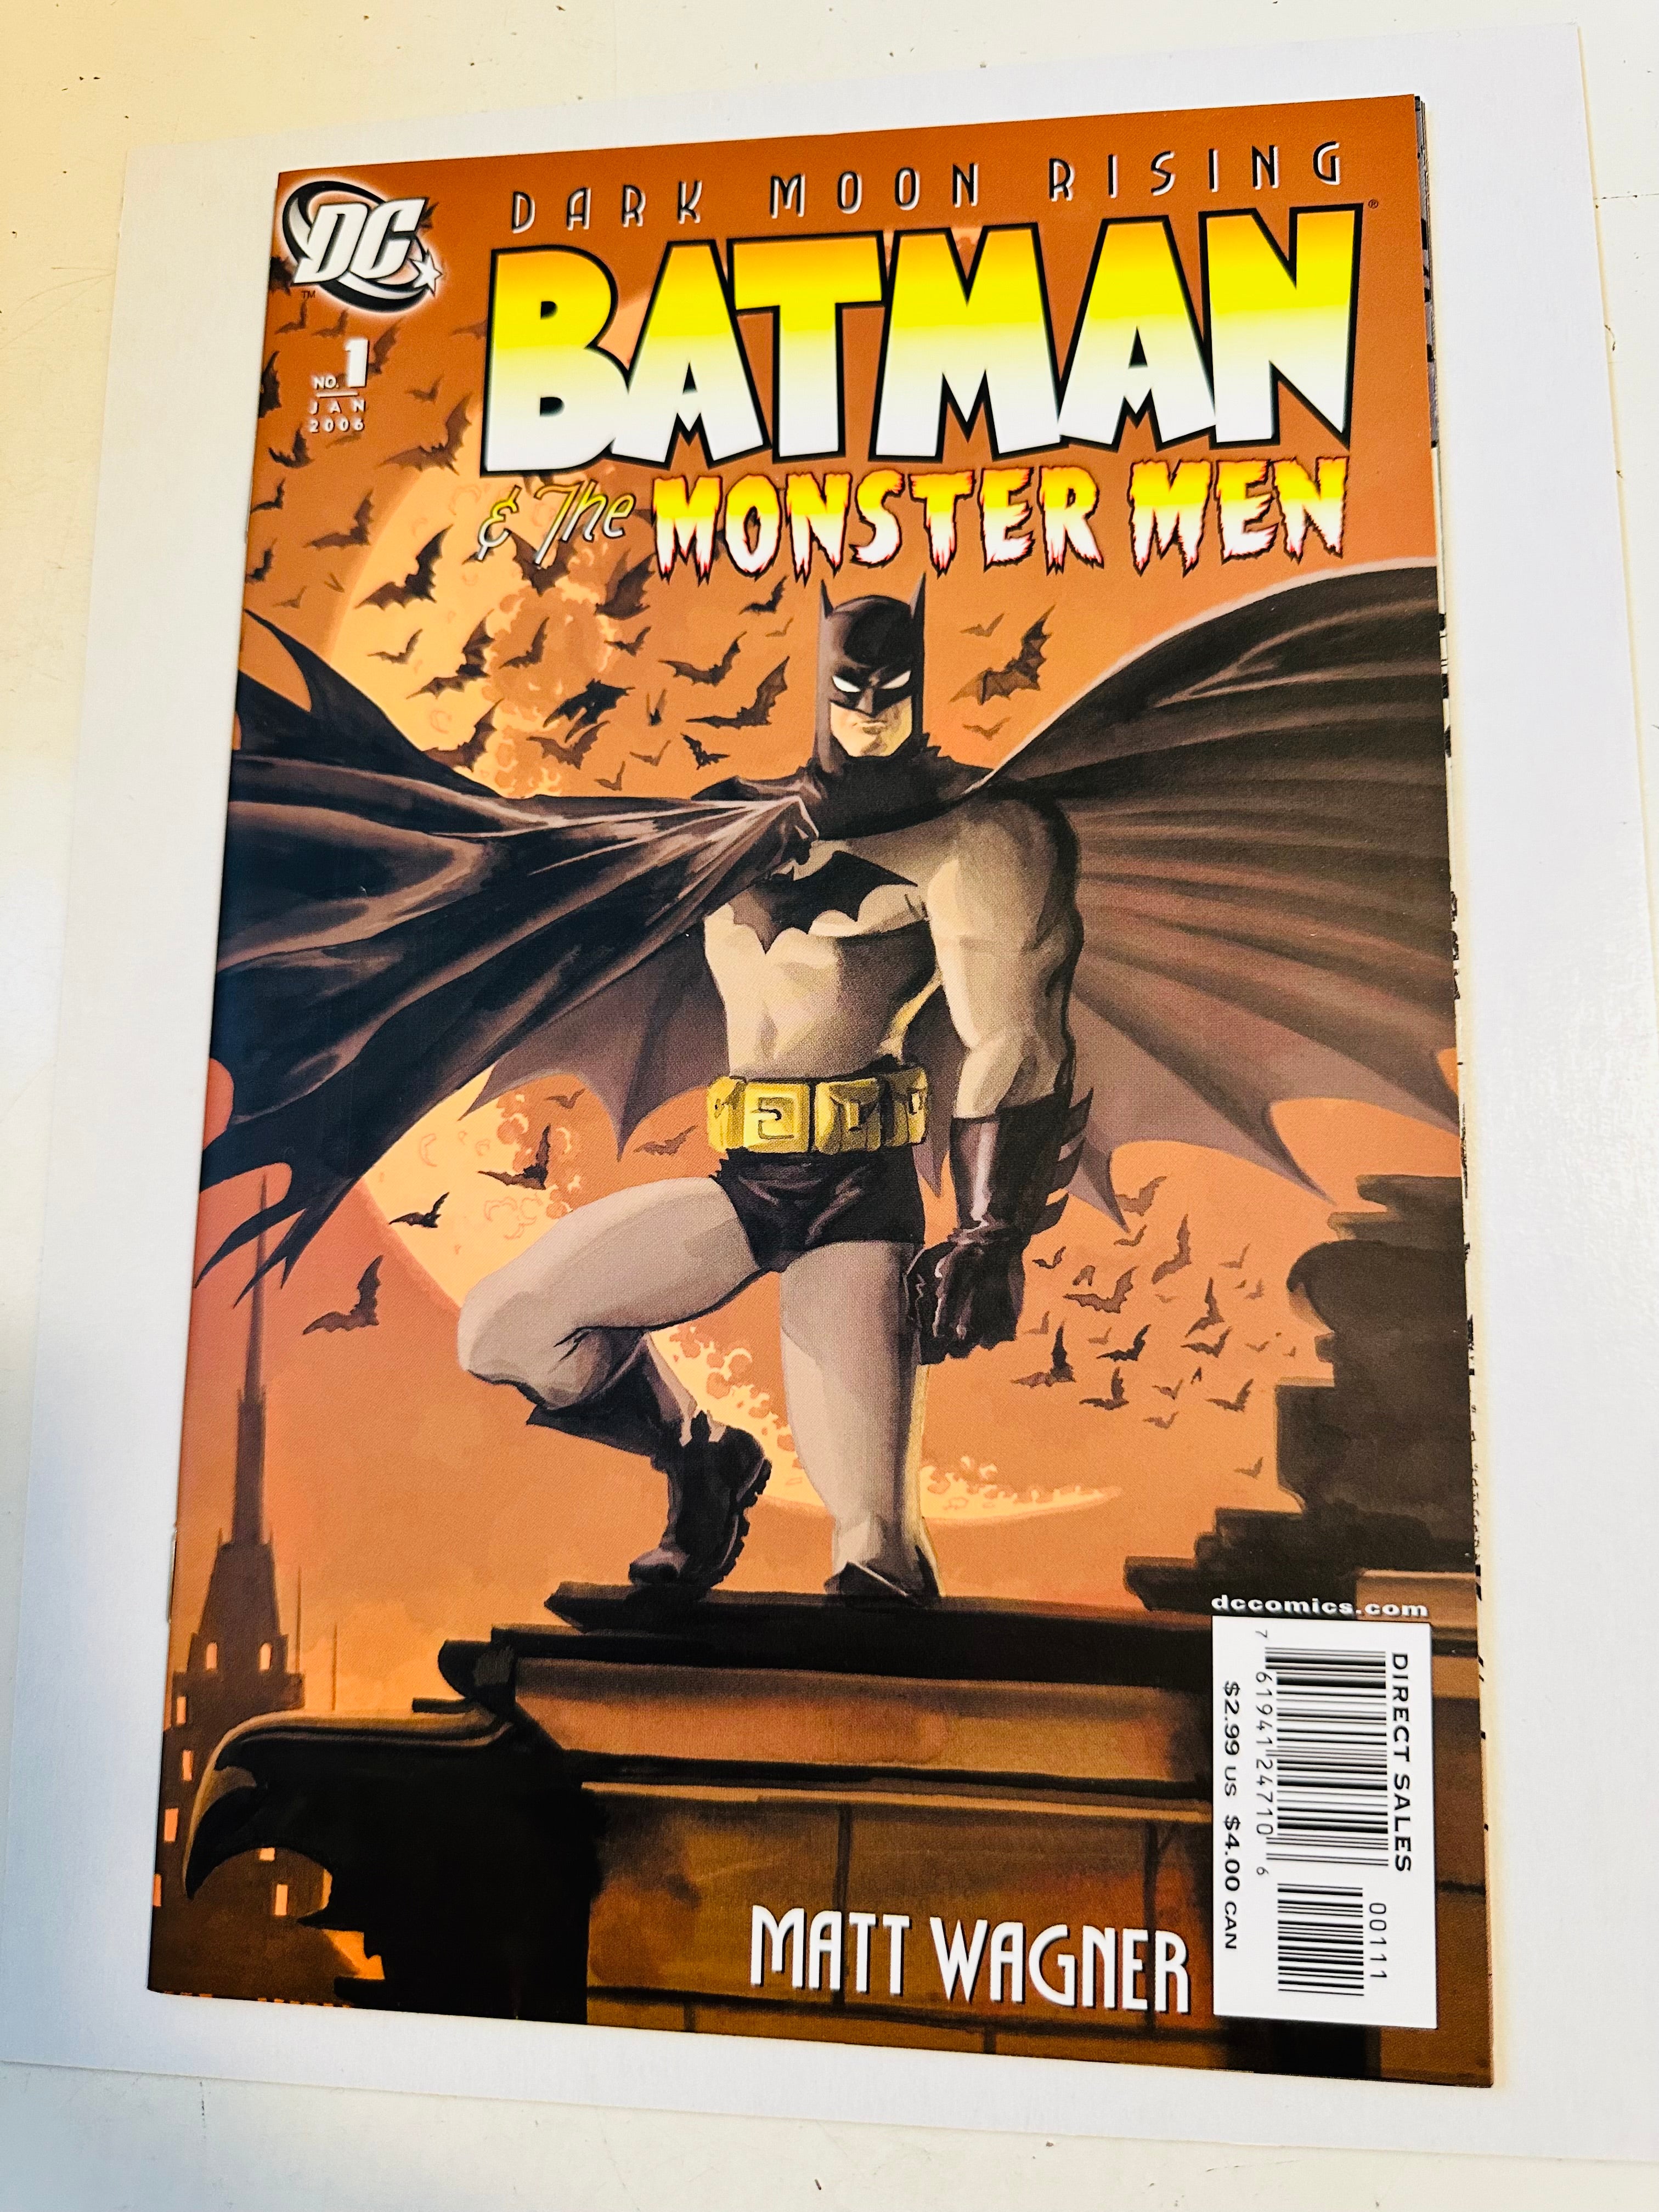 Dark moon, rising Batman in the monster man number one issue comic book